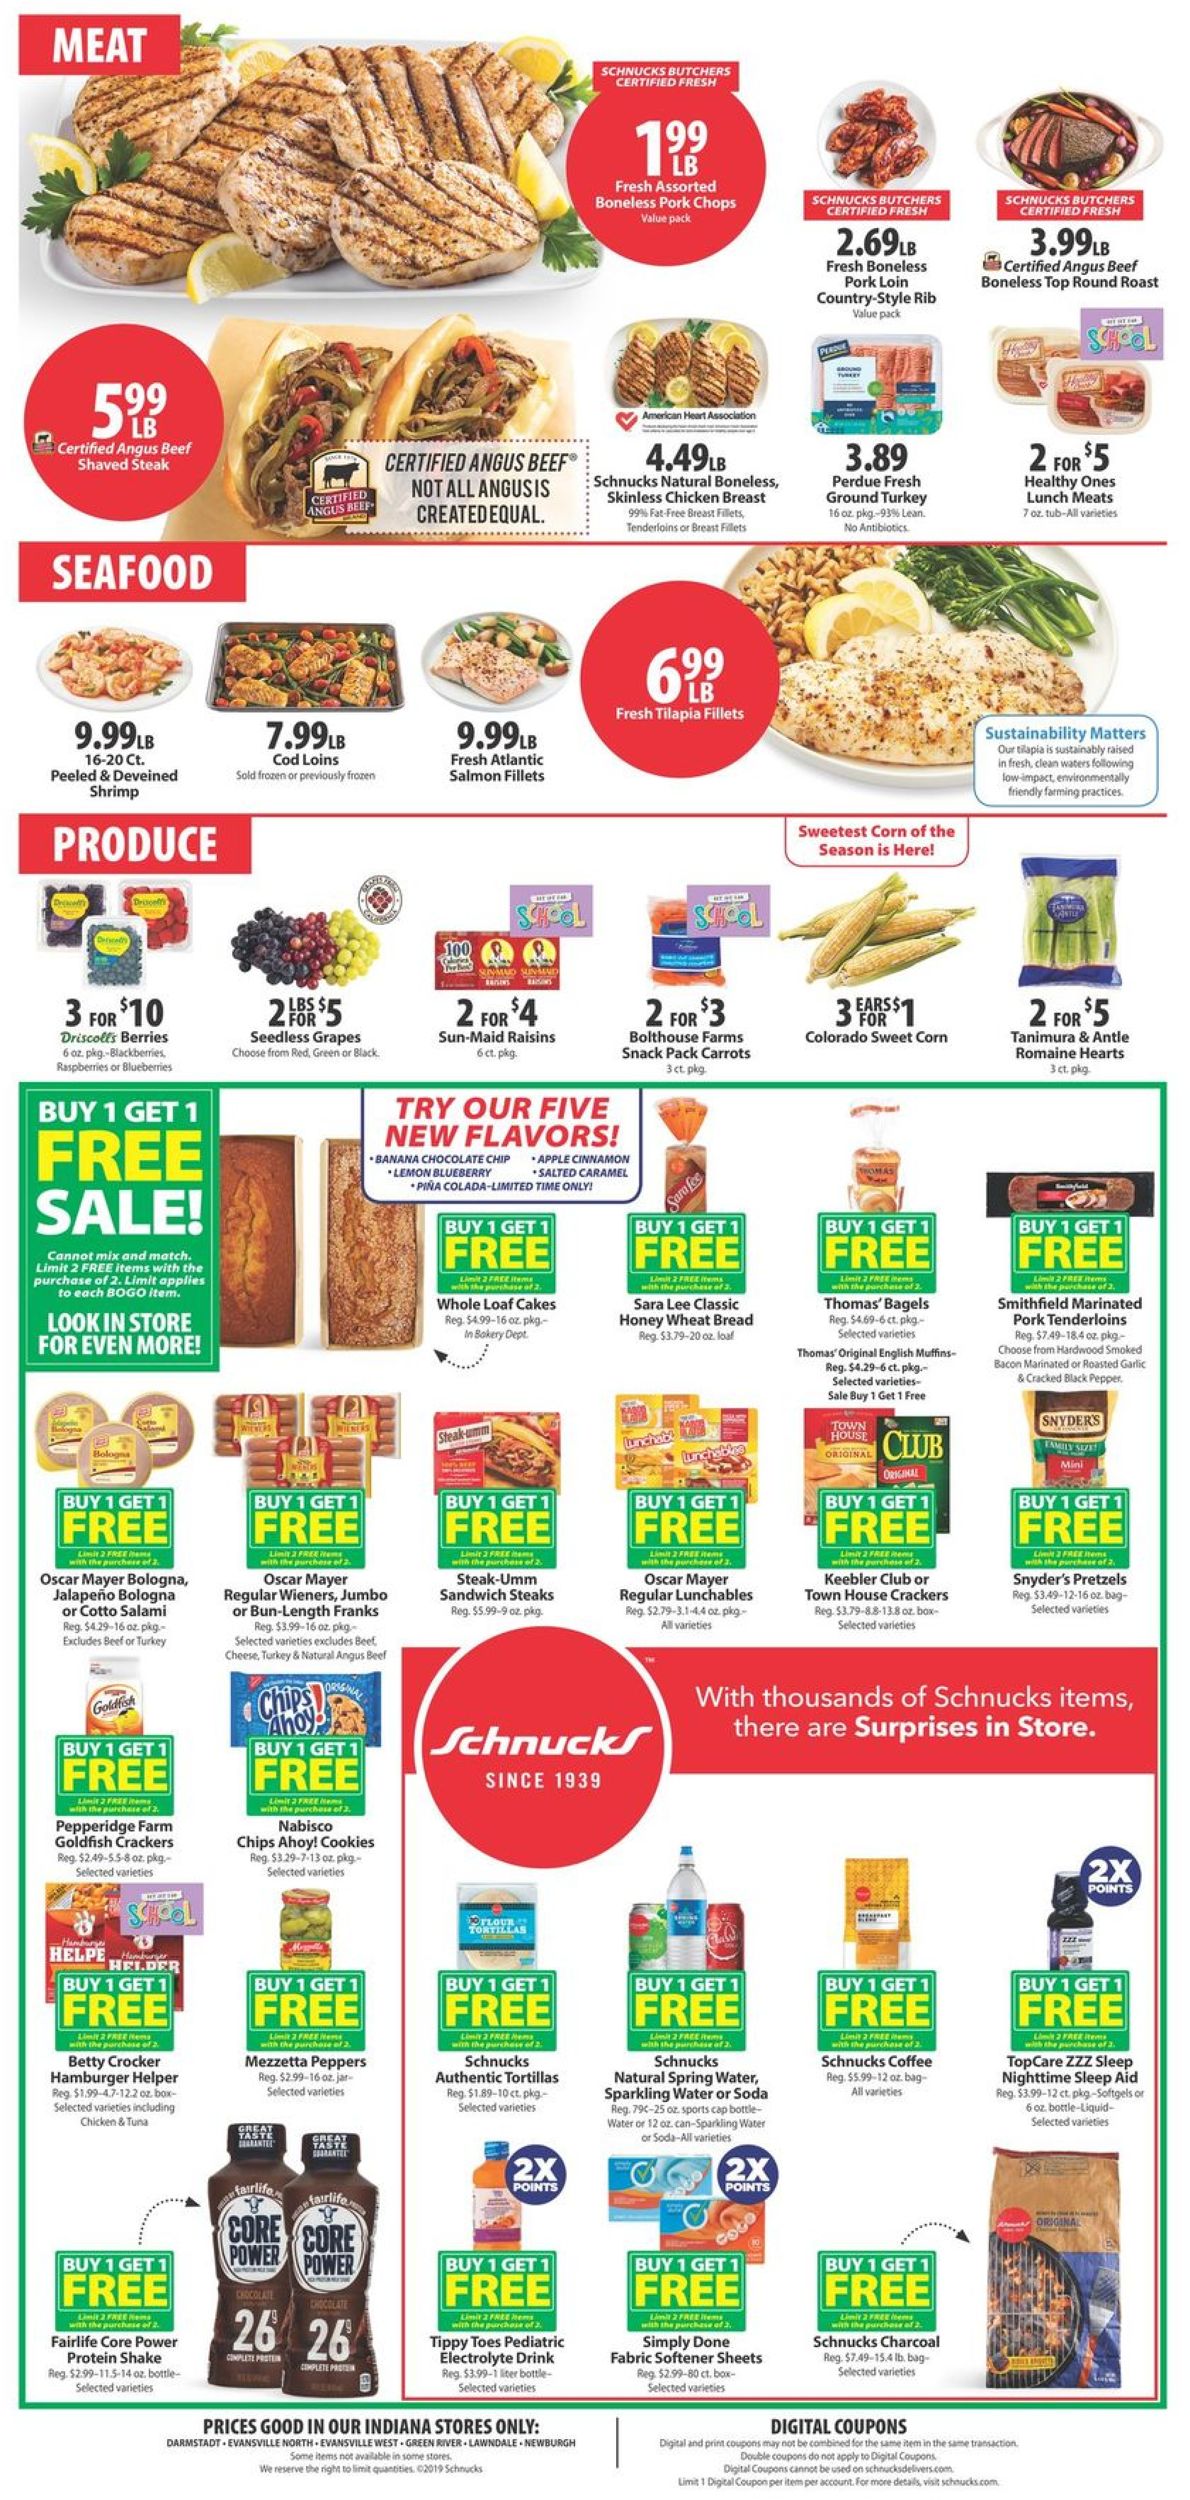 Schnucks Current weekly ad 08/21 - 08/27/2019 [4] - frequent-ads.com